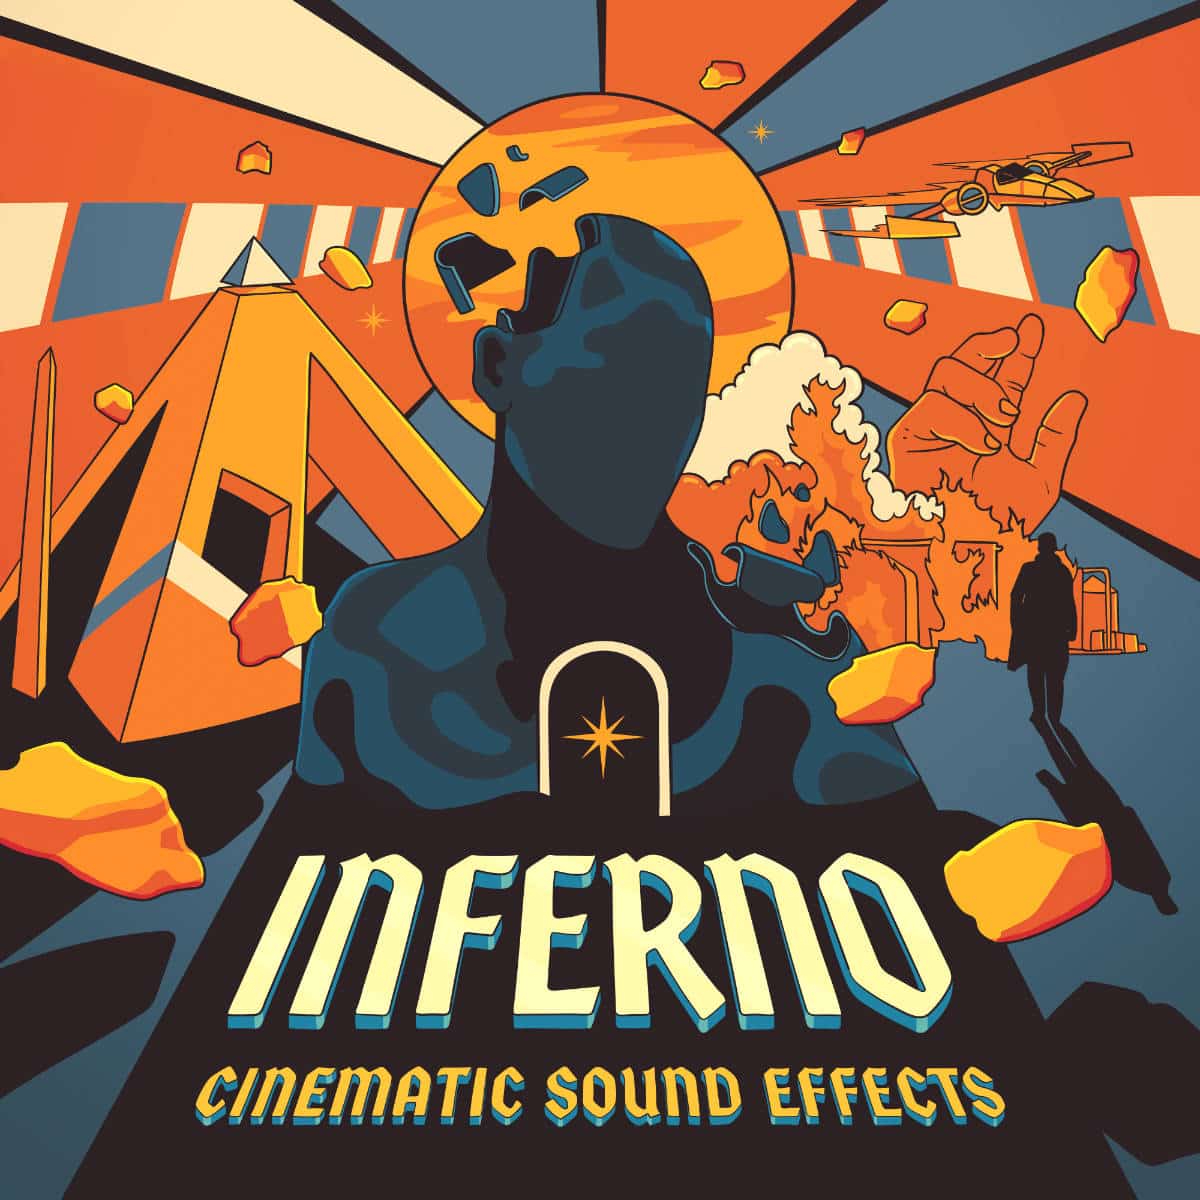 60% off “Inferno SFX Standard” by Flame Sound